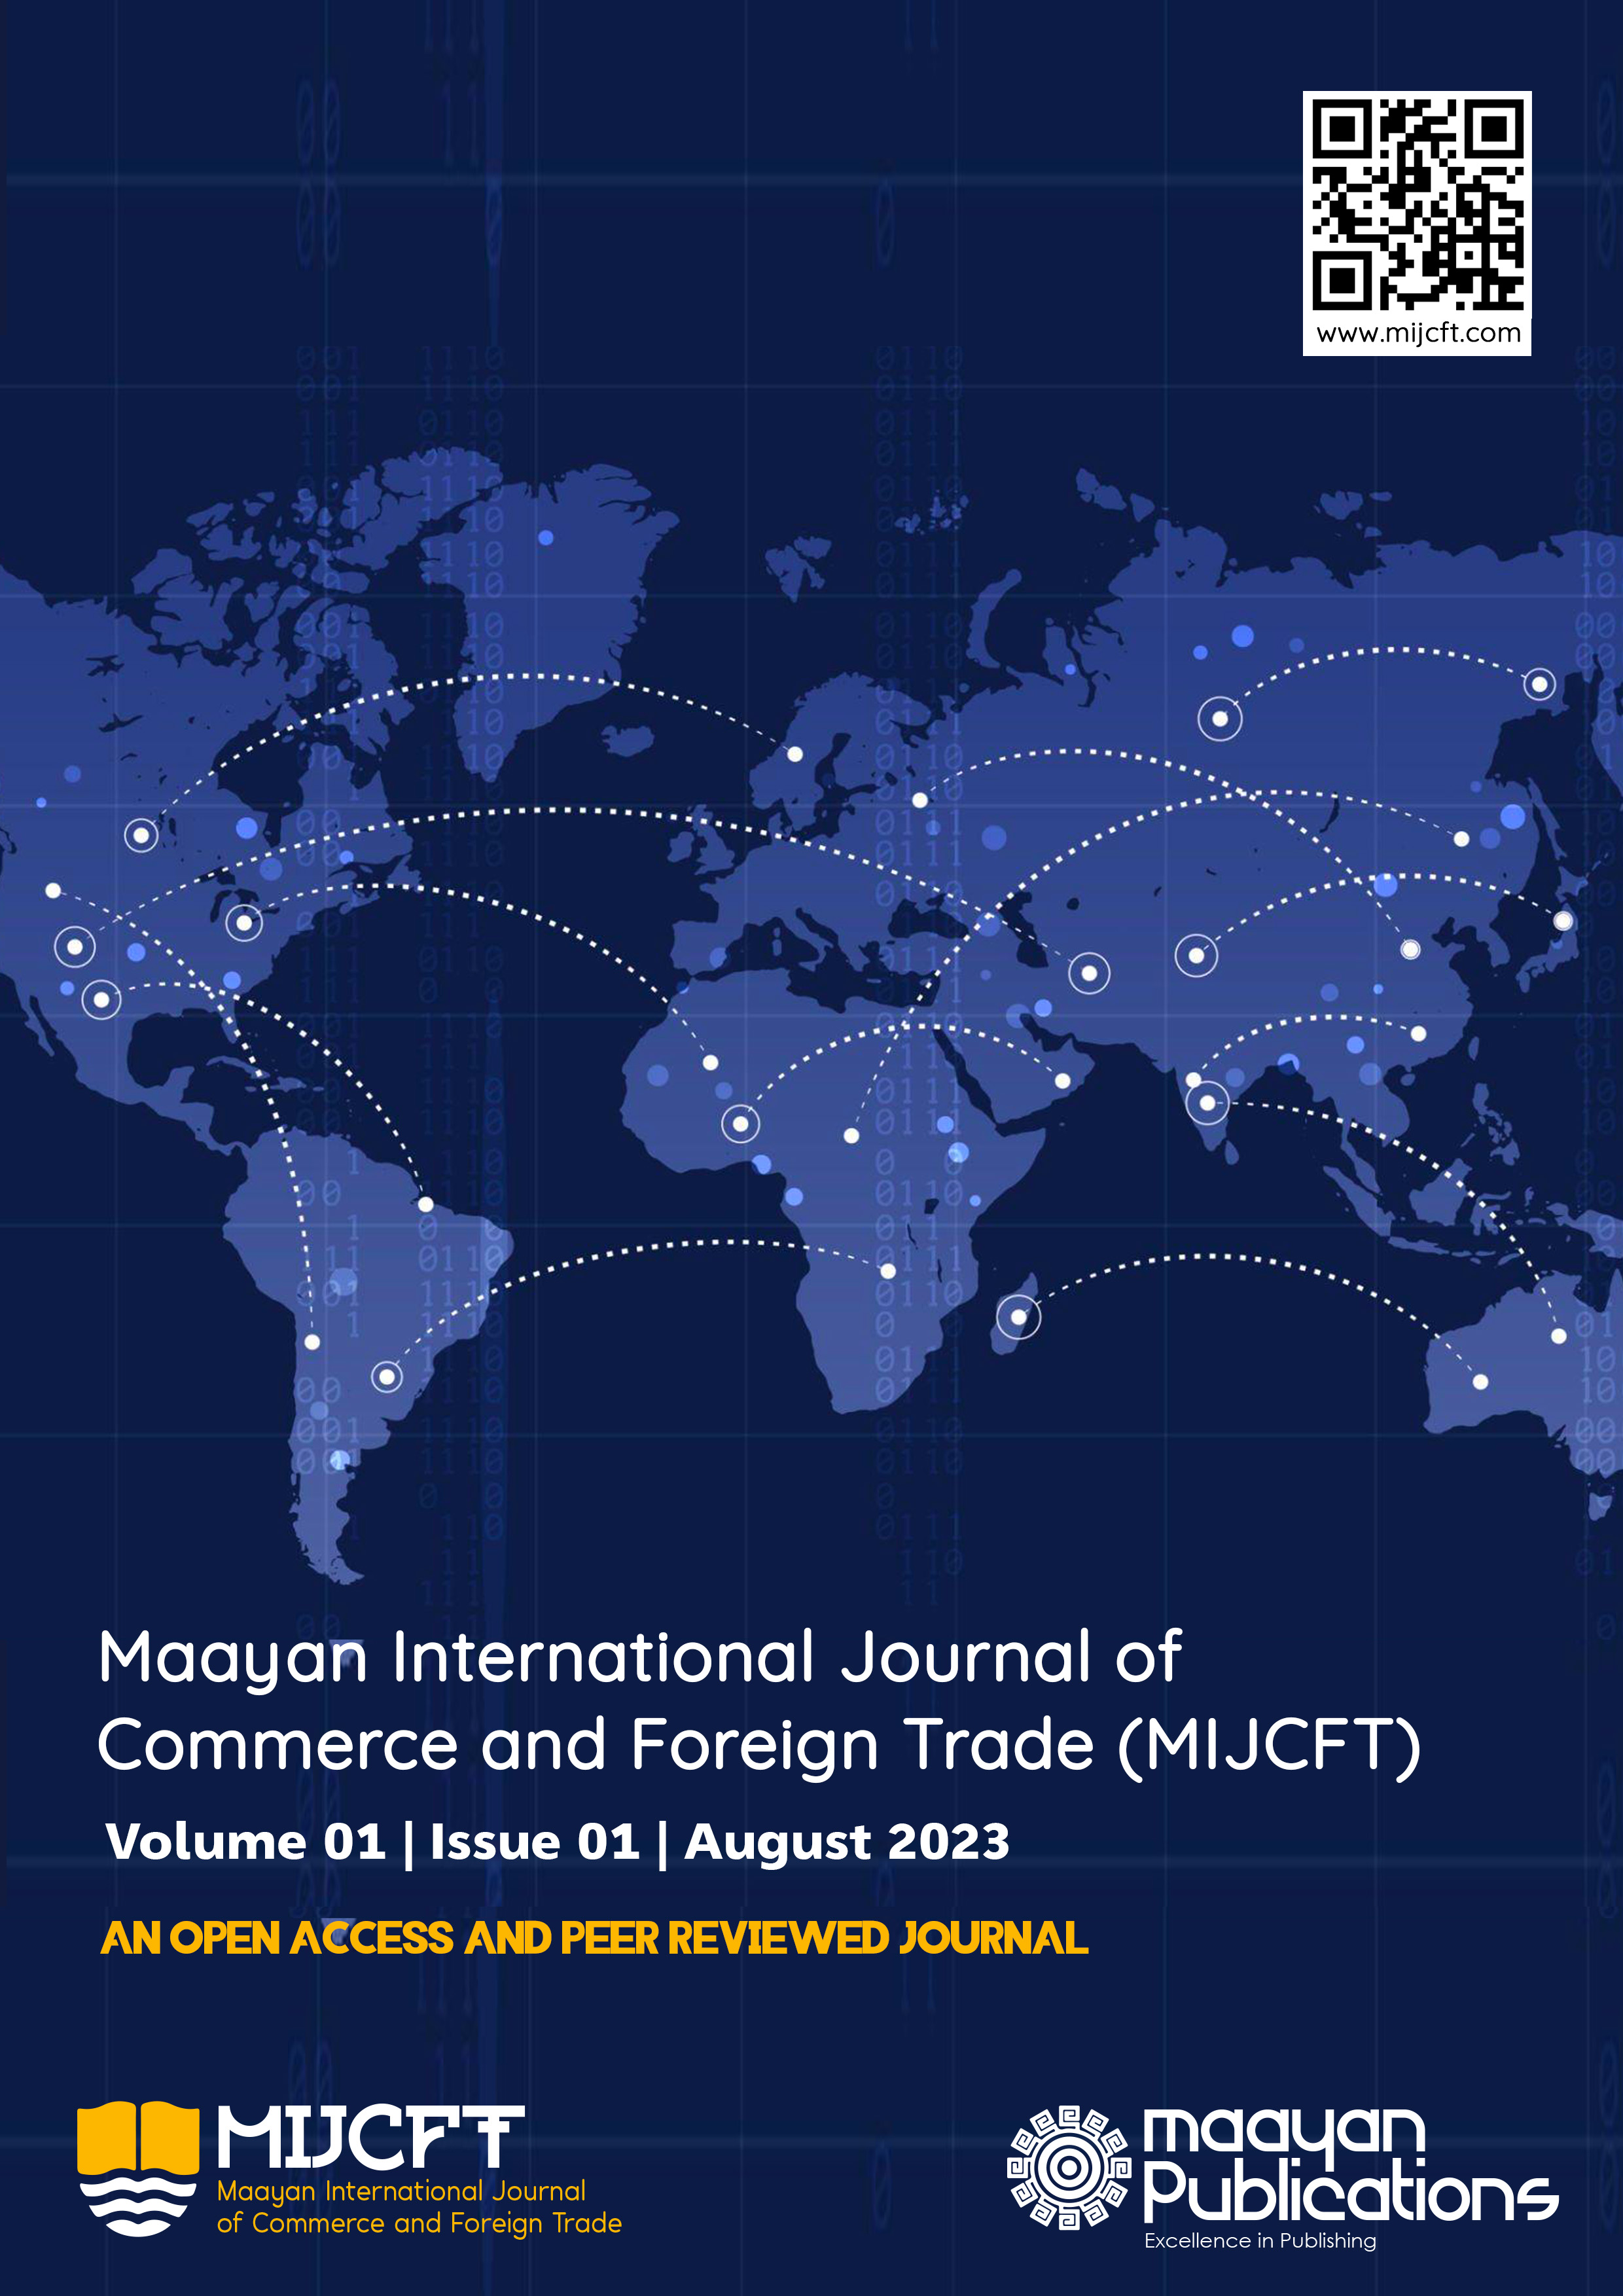 Maayan International Journal of Commerce and Foreign Trade (MIJCFT) | Volume 01 Issue 01 (August 2023)